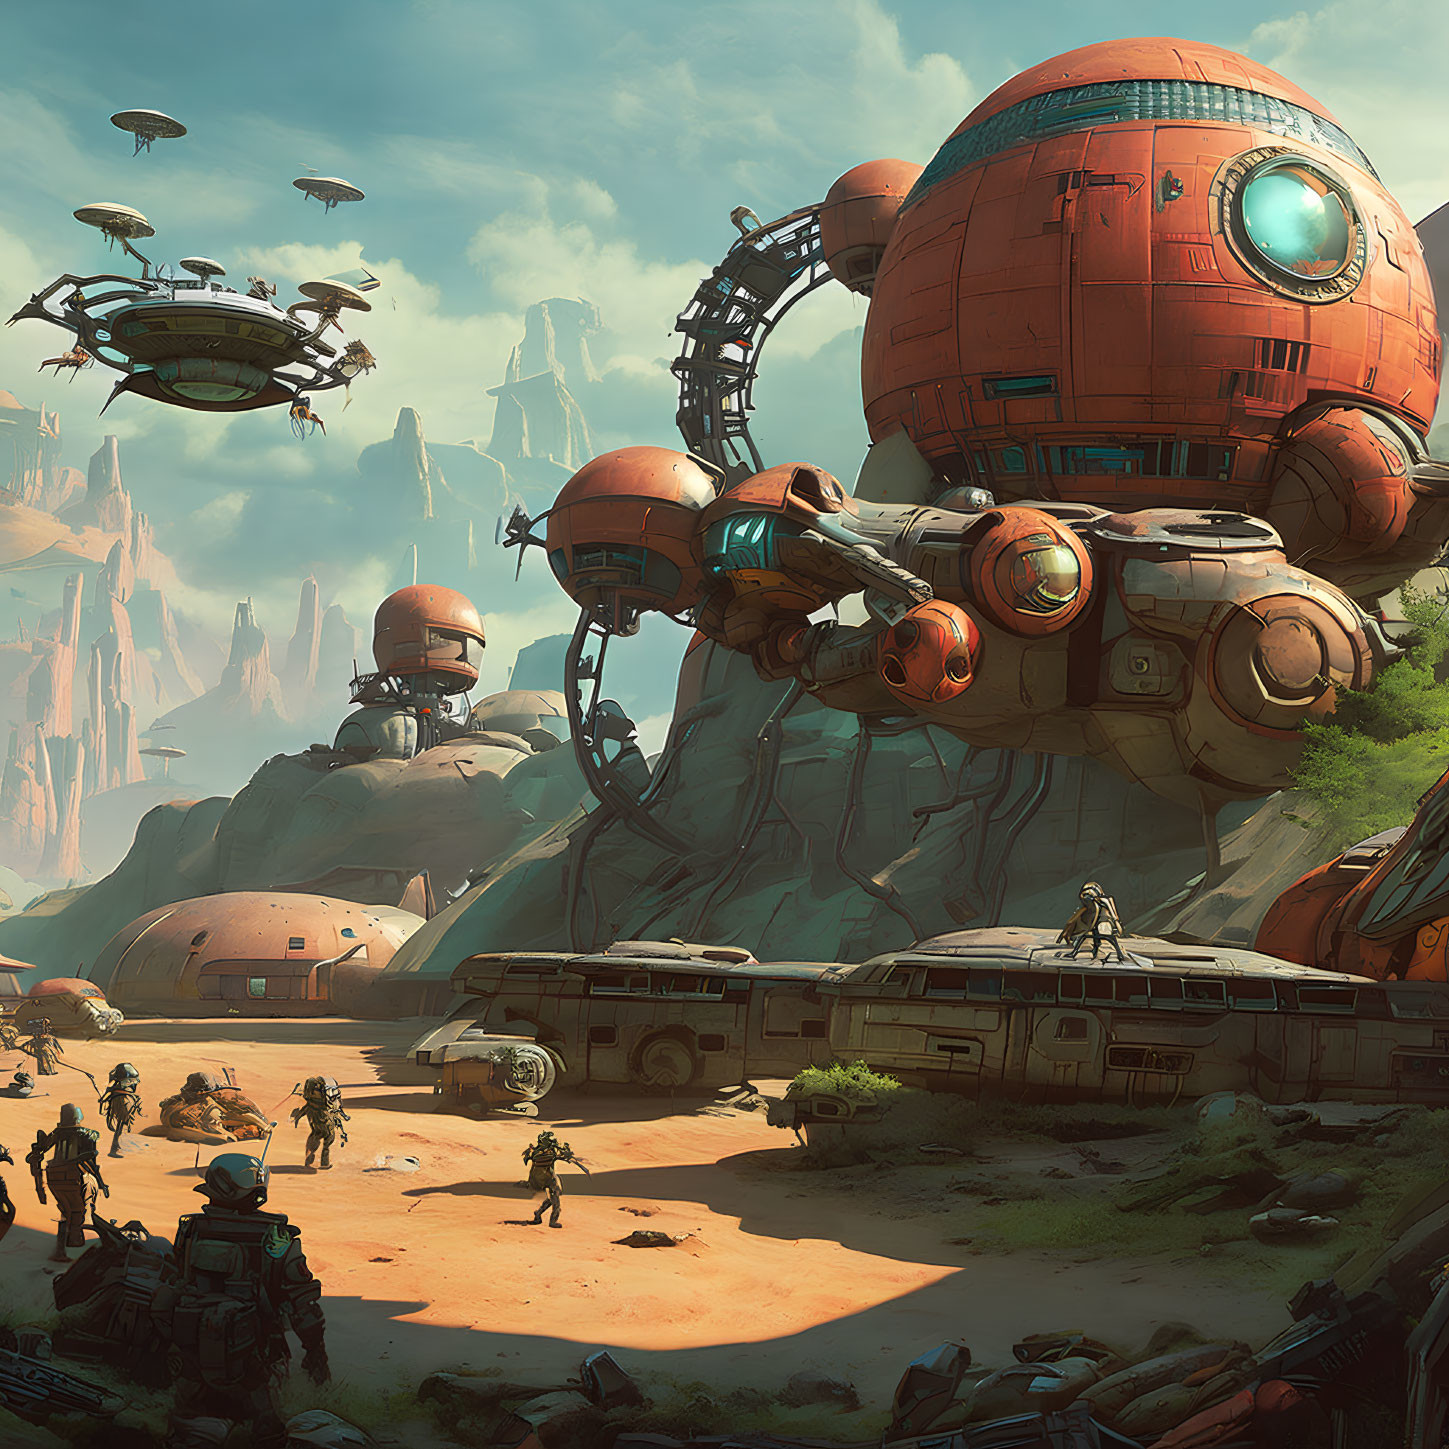 Futuristic desert landscape with spherical structures, robots, flying saucers, and individuals in spaces